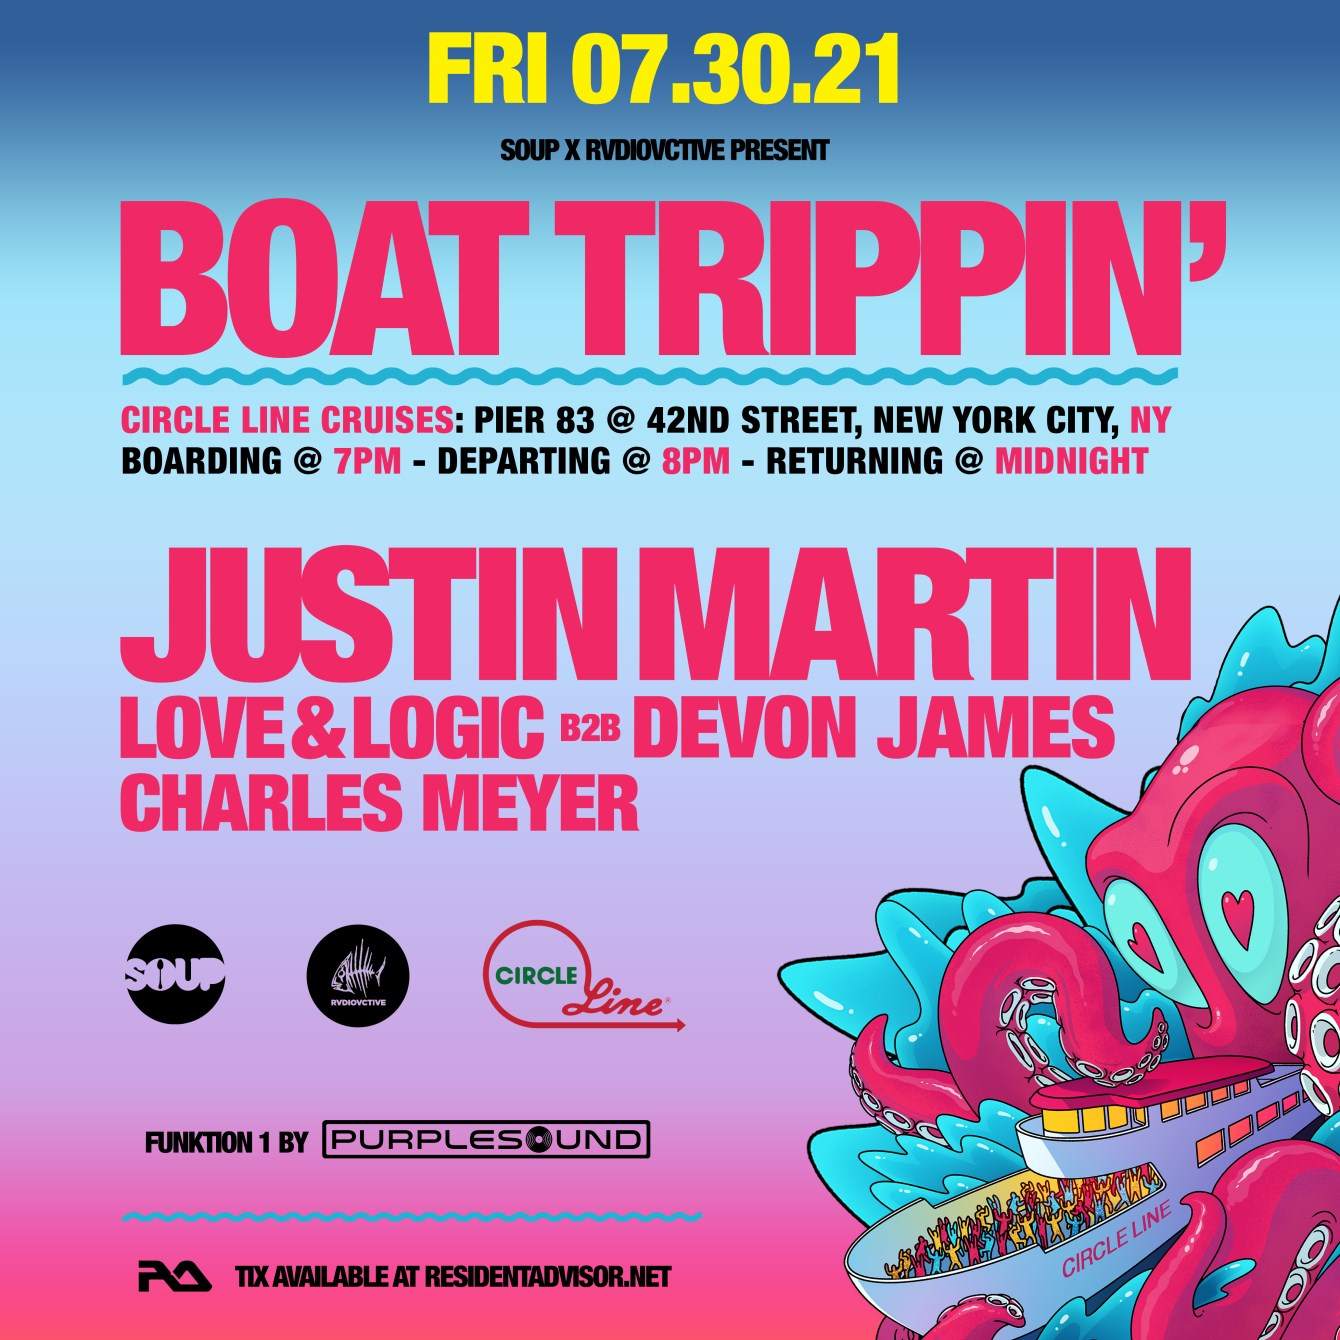 Soup x RVDIOVCTIVE present: Boat Trippin' Second Sailing with Justin Martin - Página frontal